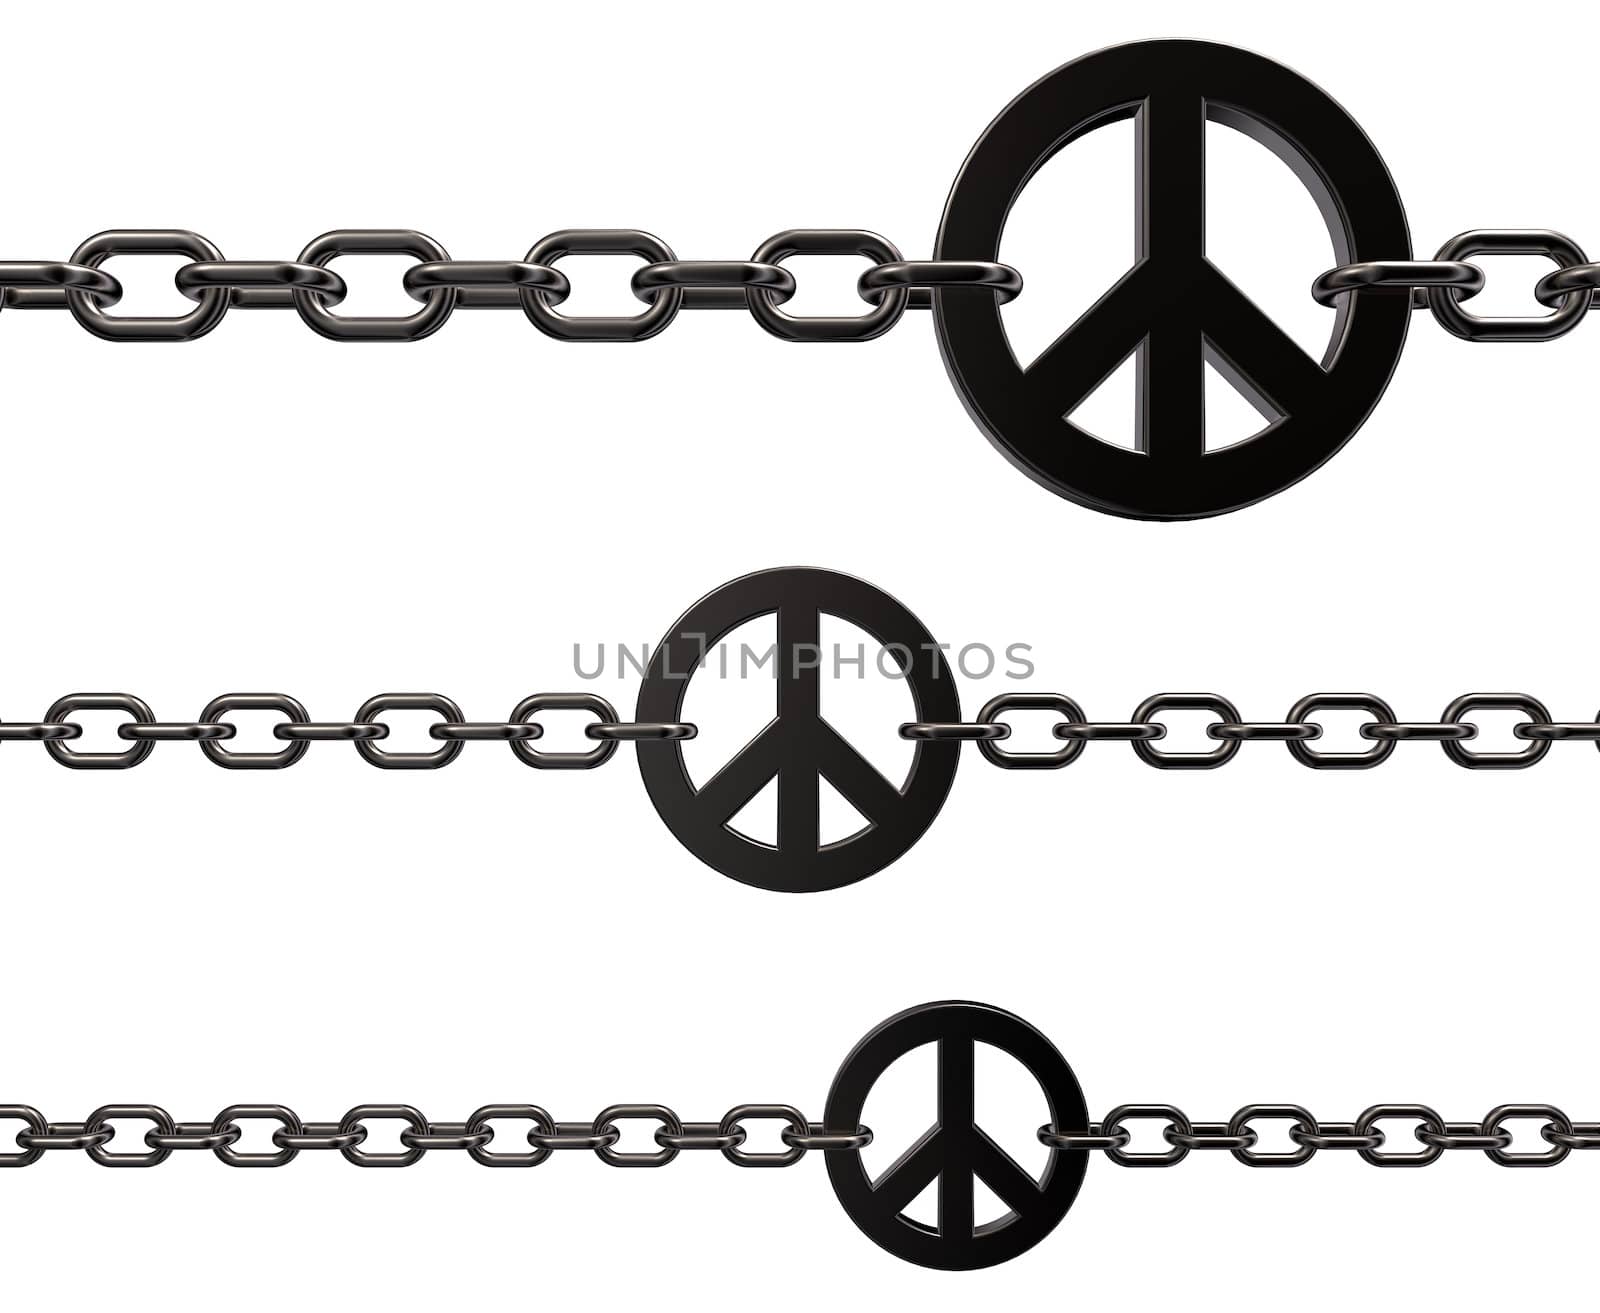 chains with metal peace symbol on white background - 3d illustration